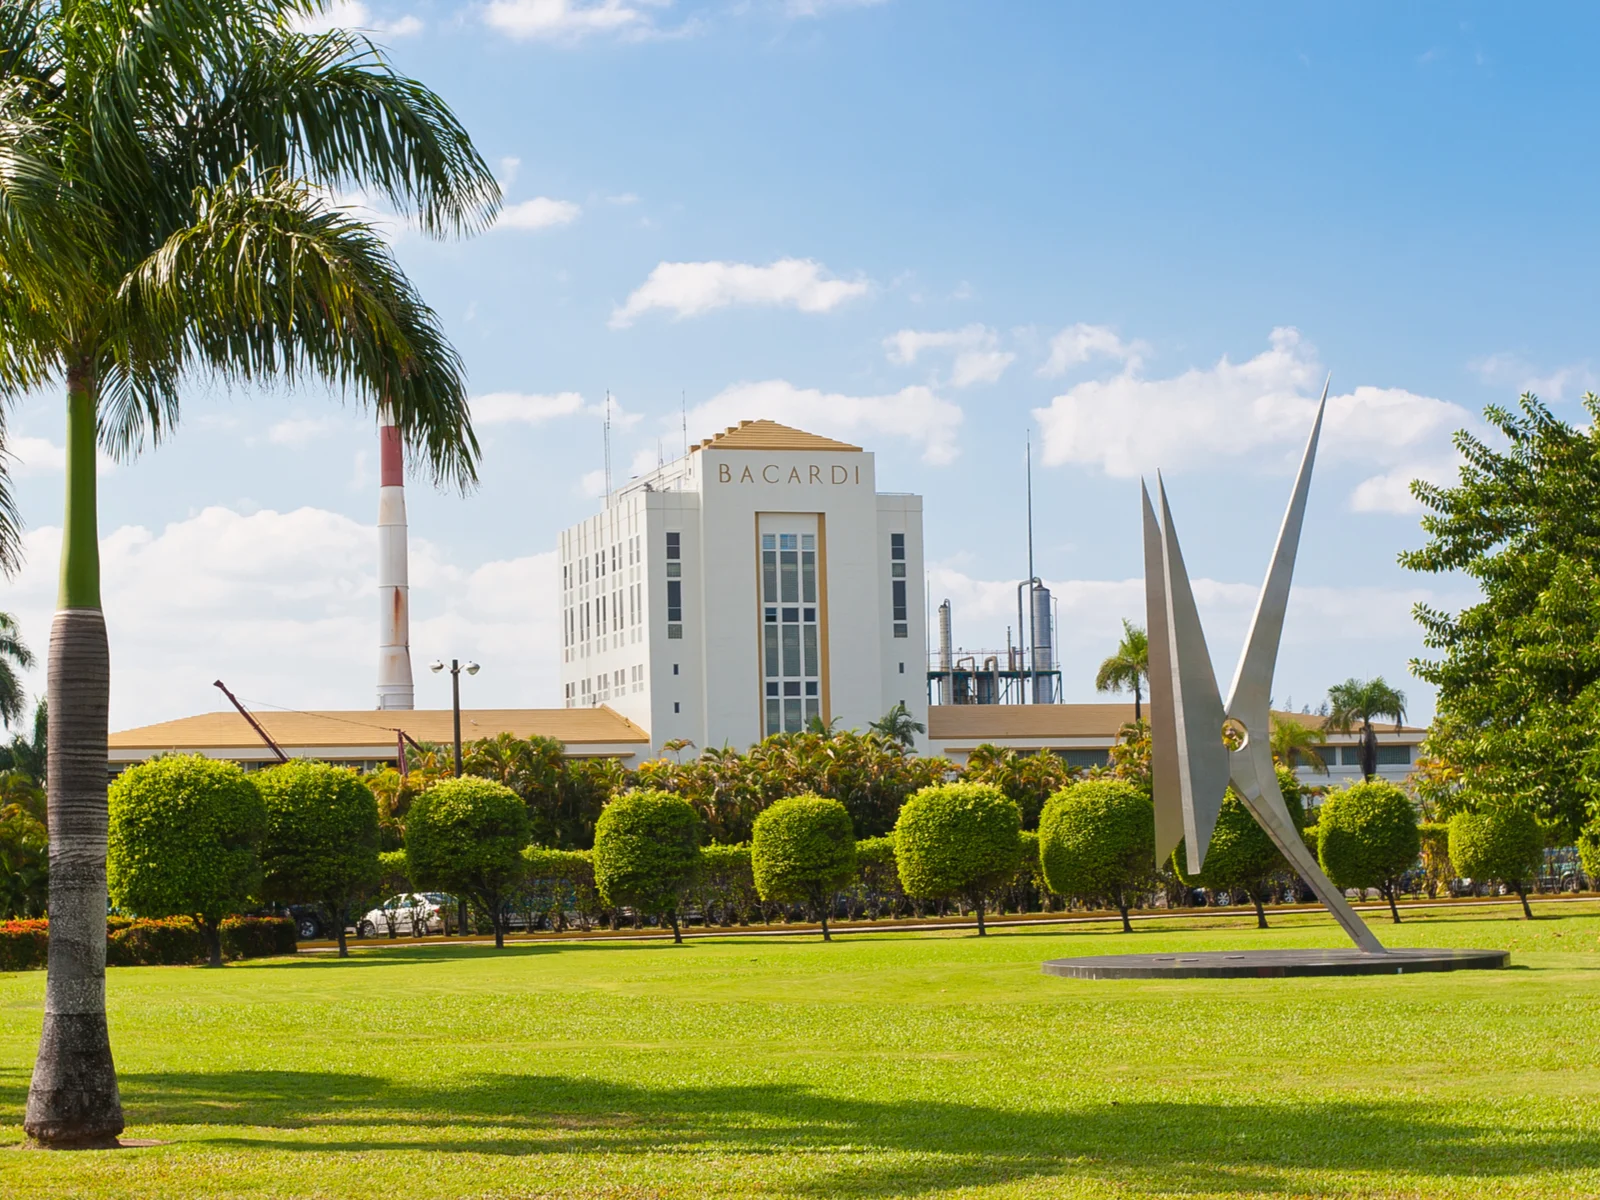 Casa Bacardi distillery with a neat landscape and a sculpture pictured as one of the best things to do in Puerto Rico